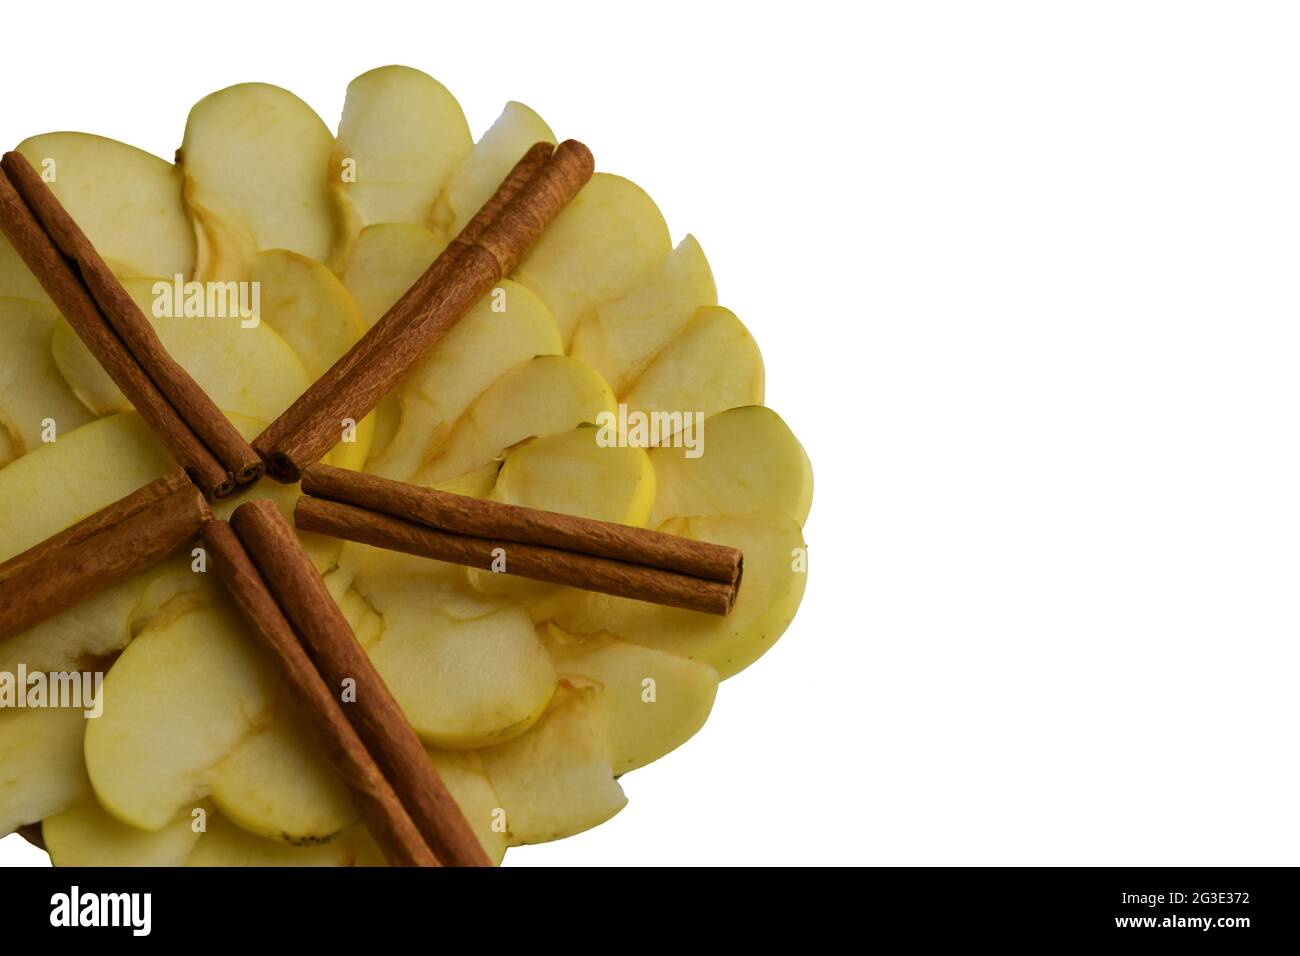 Sliced ??white apples and cinnamon lined with a circle and a star on a white background Stock Photo